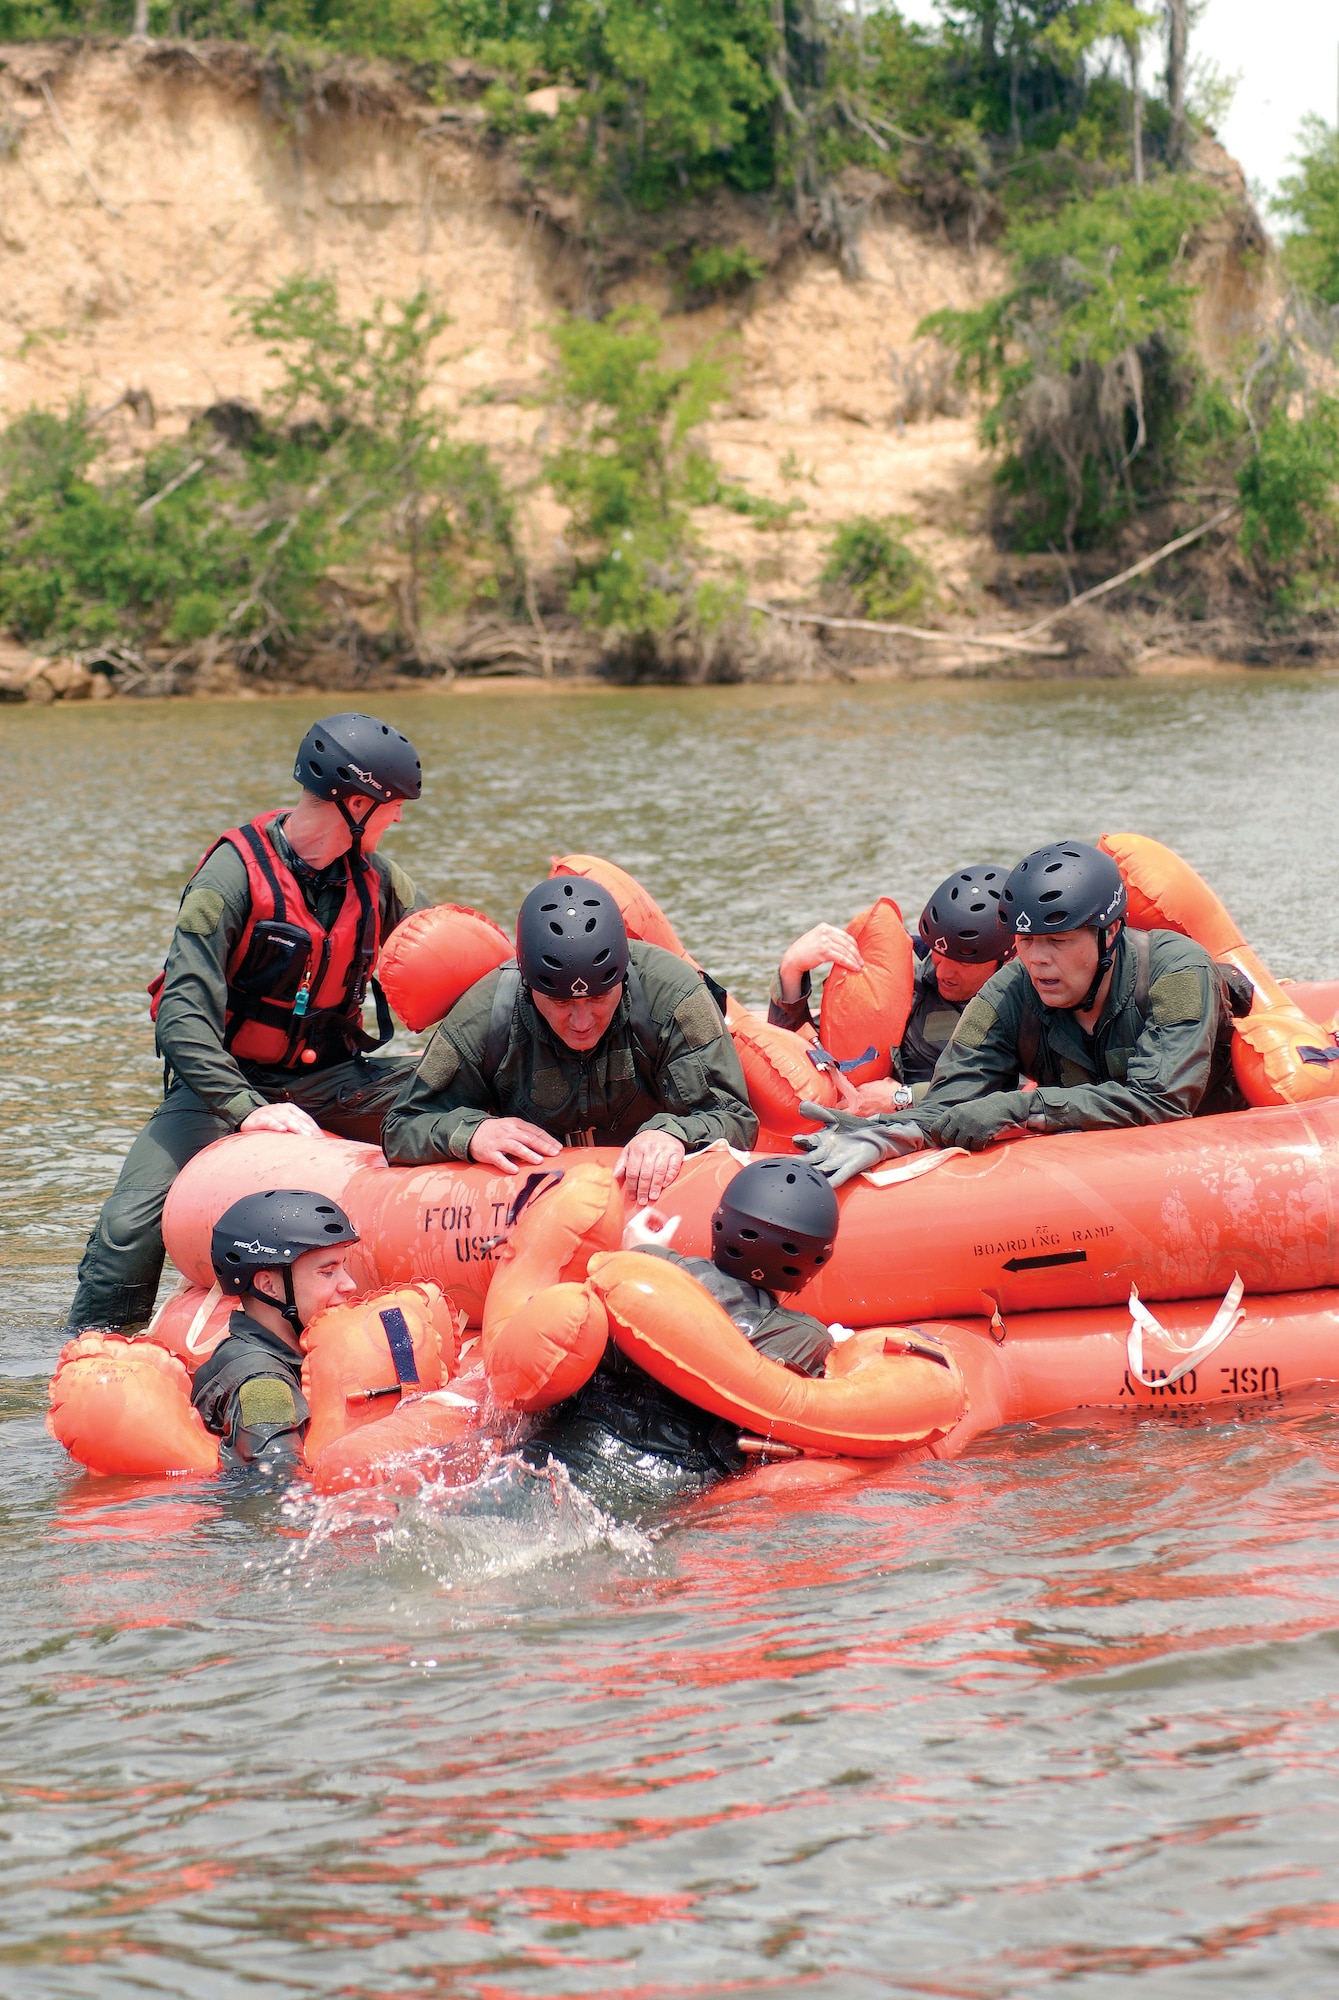 Senior Airman Chad Braunschweig (red floatation vest) observes as members of the operations group help each other into a 20-man raft during the 908th Airlift Wing's water-survival training at the Alabama River.  (Air Force photo by Gene H. Hughes)